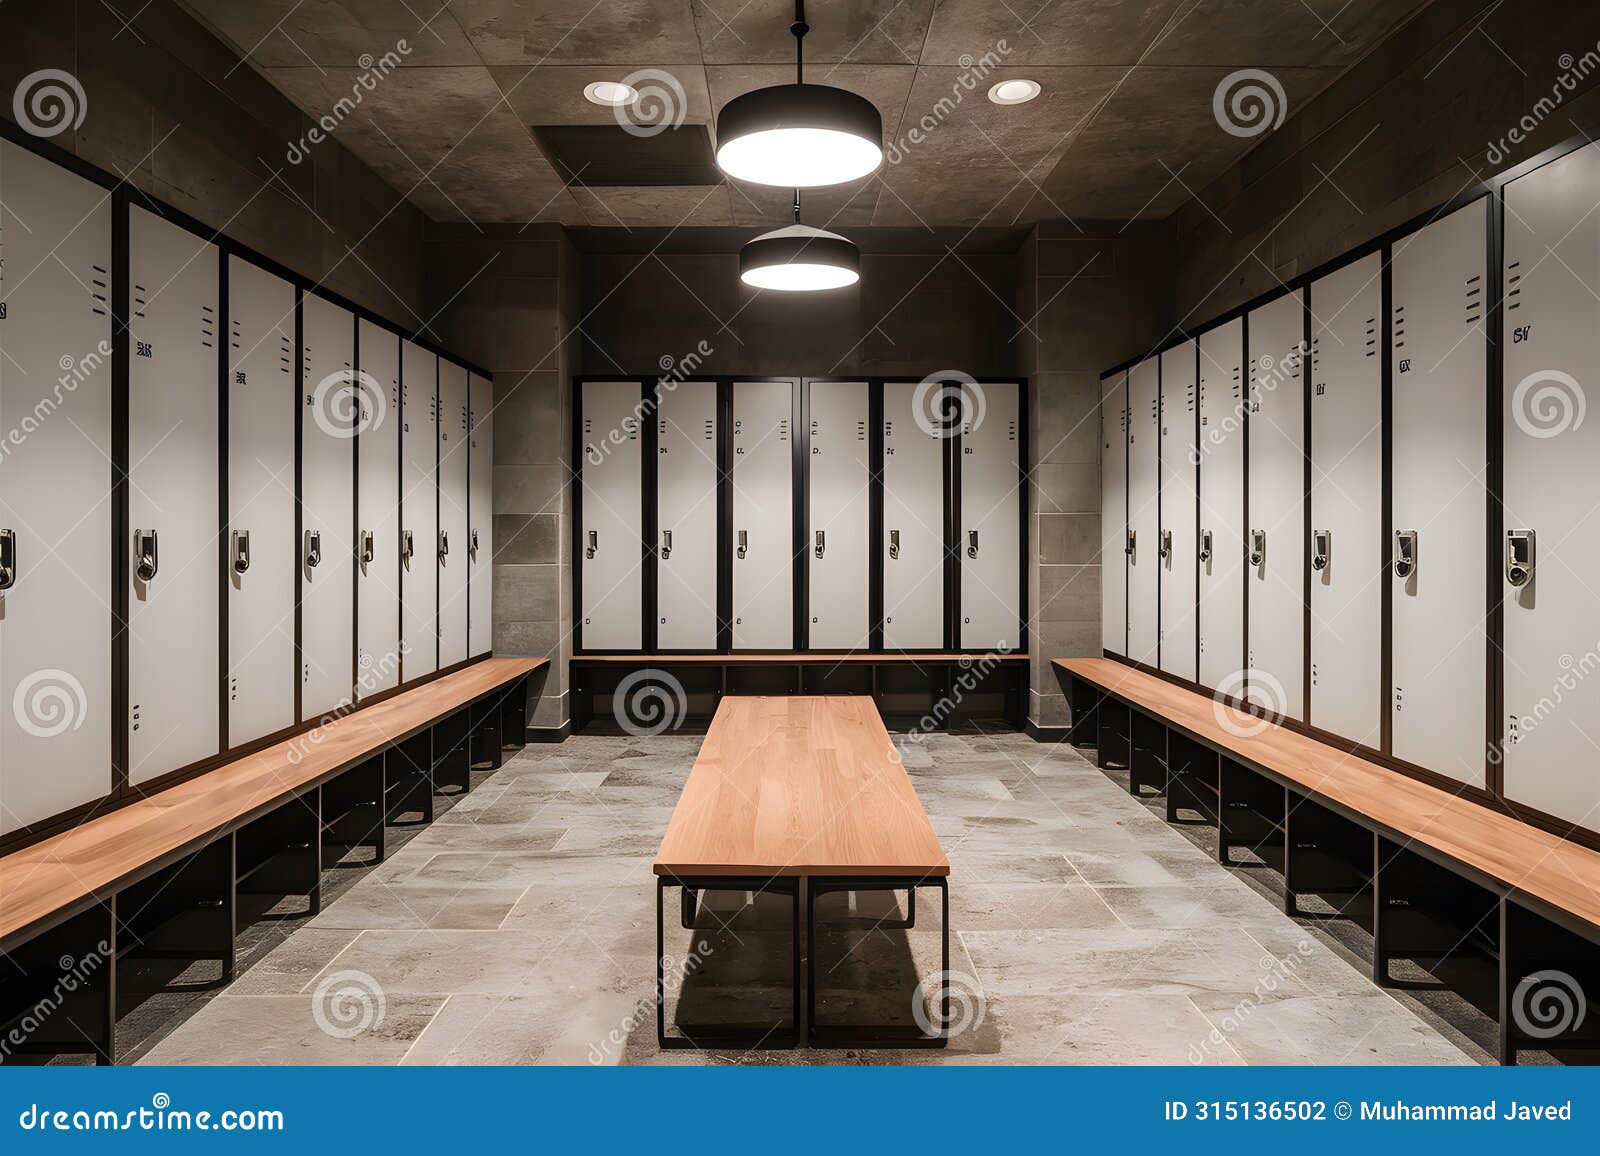 modern functionality empty locker room with contemporary metal lockers